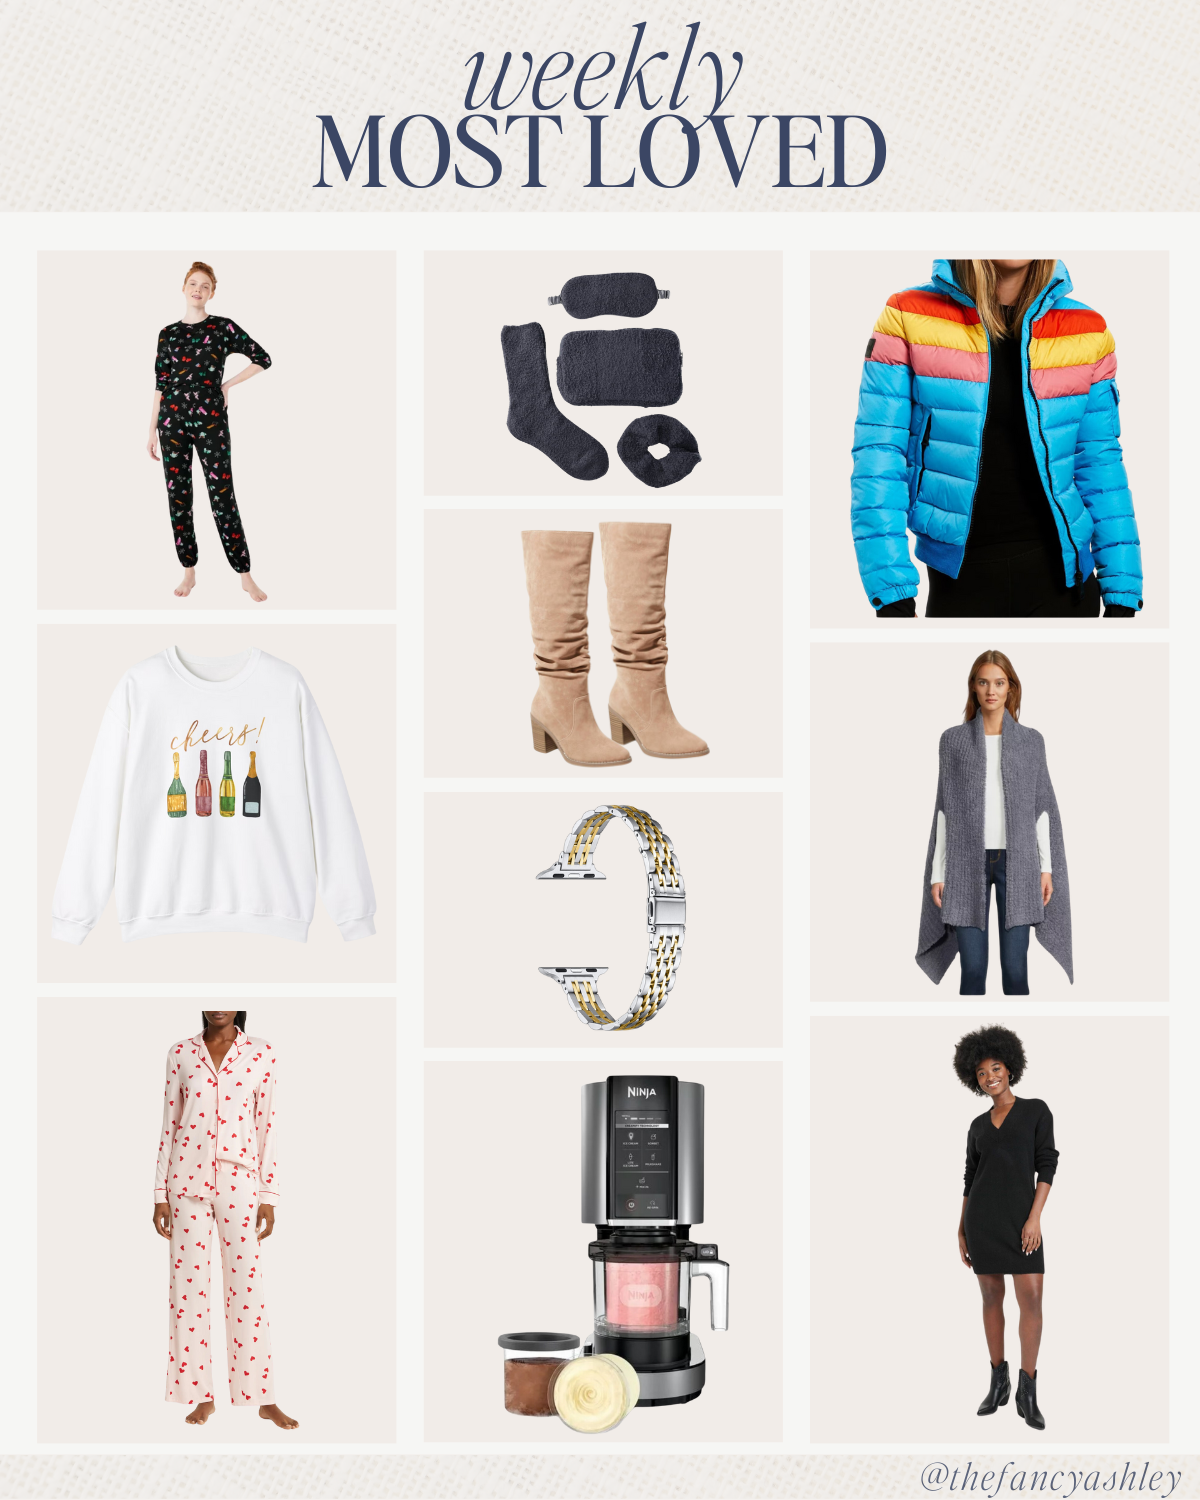 Your Most Loved From the Week